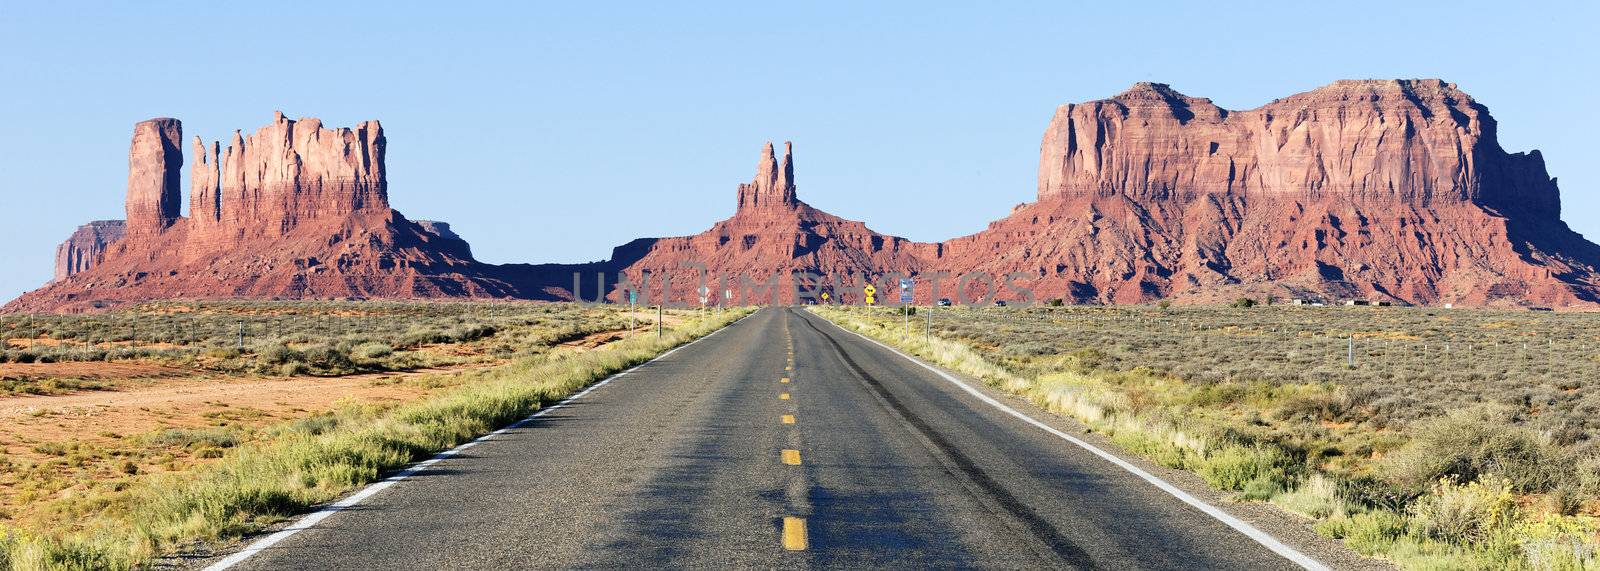 panoramic view of  road to Monument Valley, USA